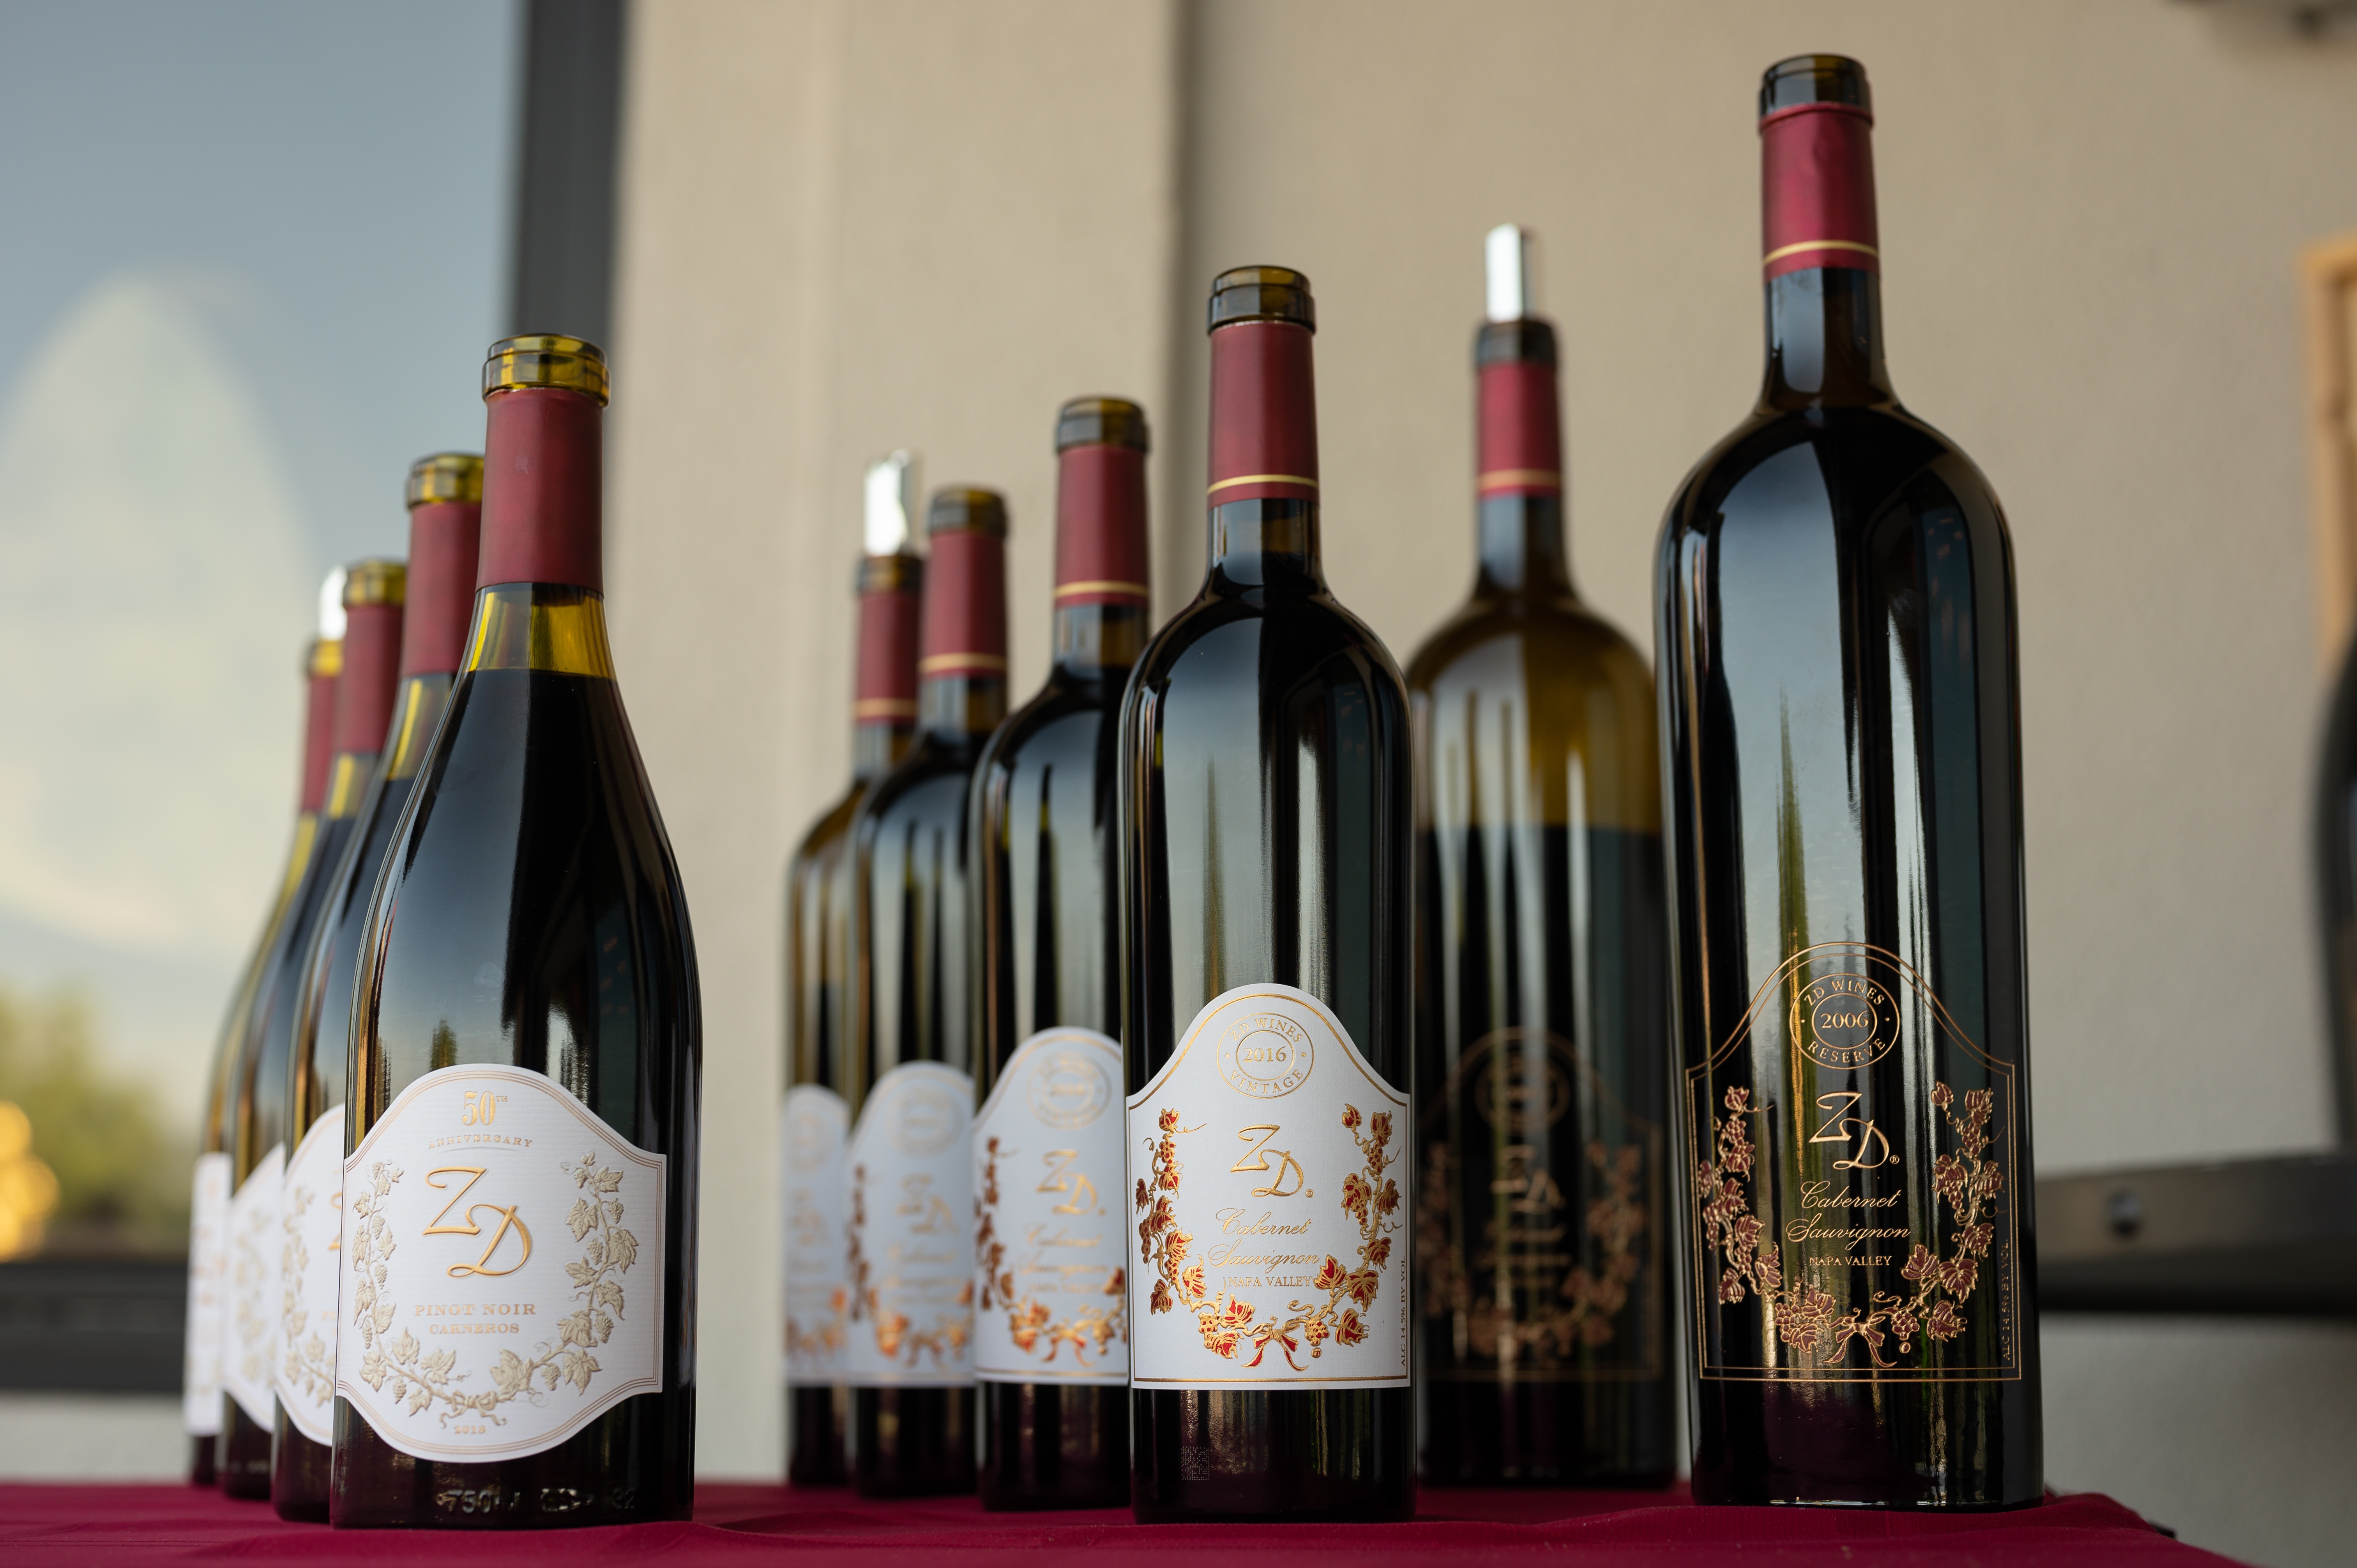 The deLeuze family produces wines from their certified organic vineyards in the Rutherford and Carneros regions, as well as organic vineyards in Napa, Santa Barbara, Monterey, and Sonoma.